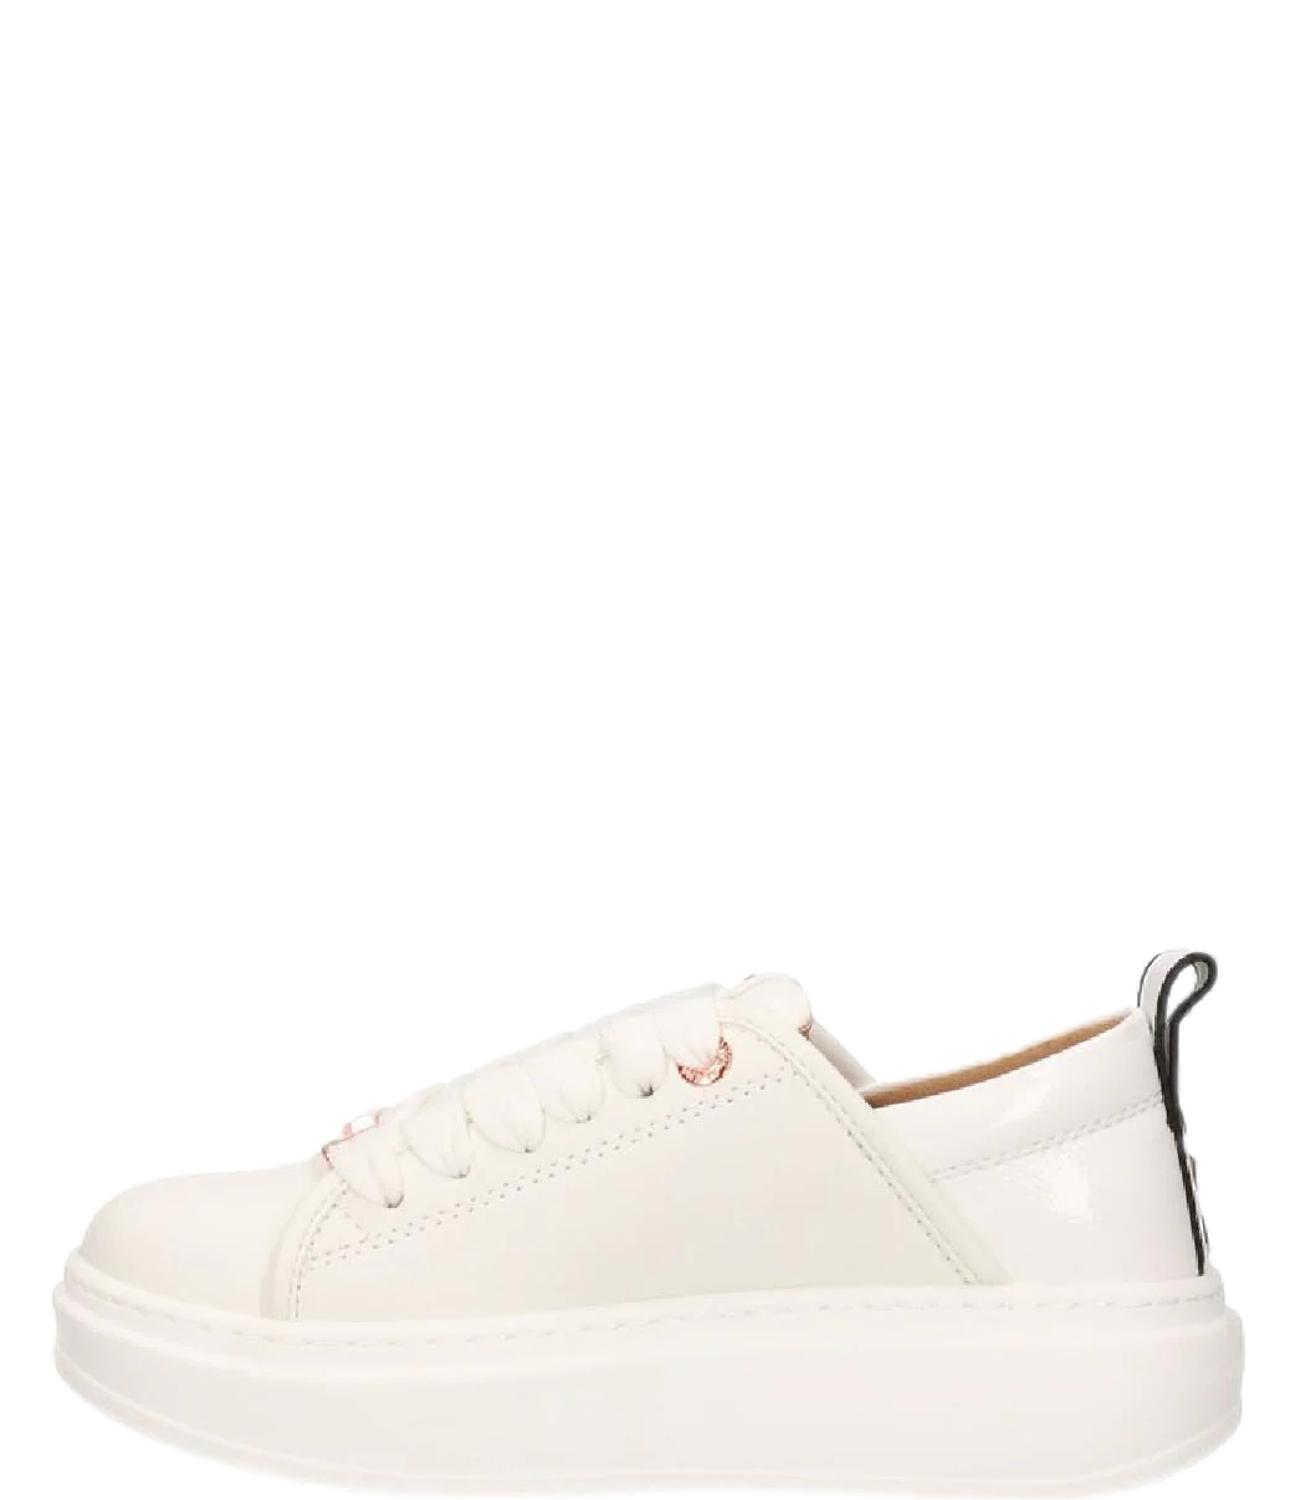 Alexander Smith sneakers Eco Wembley total white